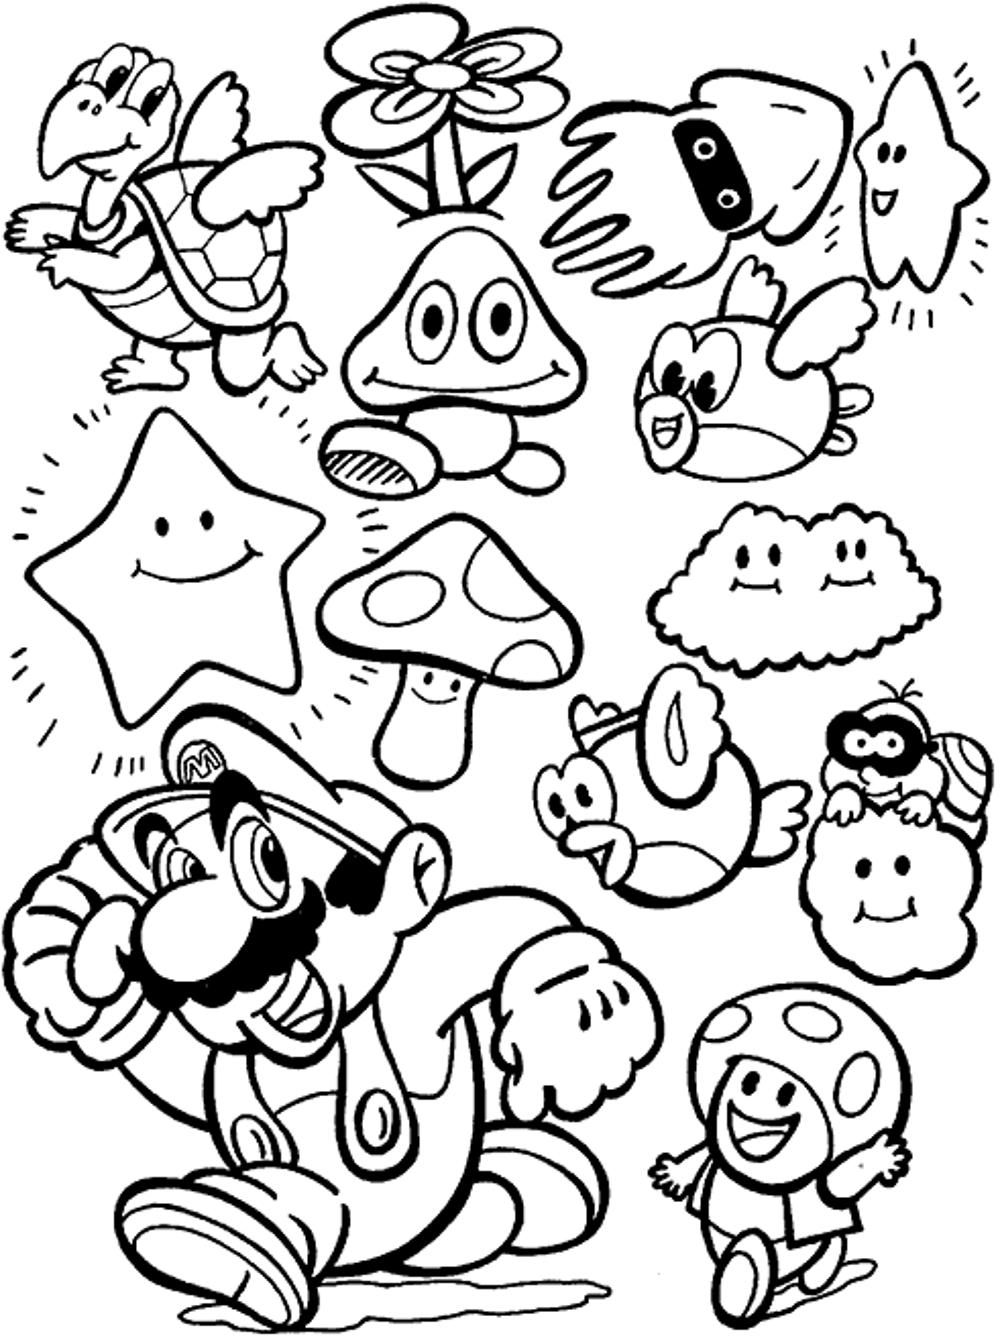 super mario bros coloring pages to print     BestAppsForKids.com